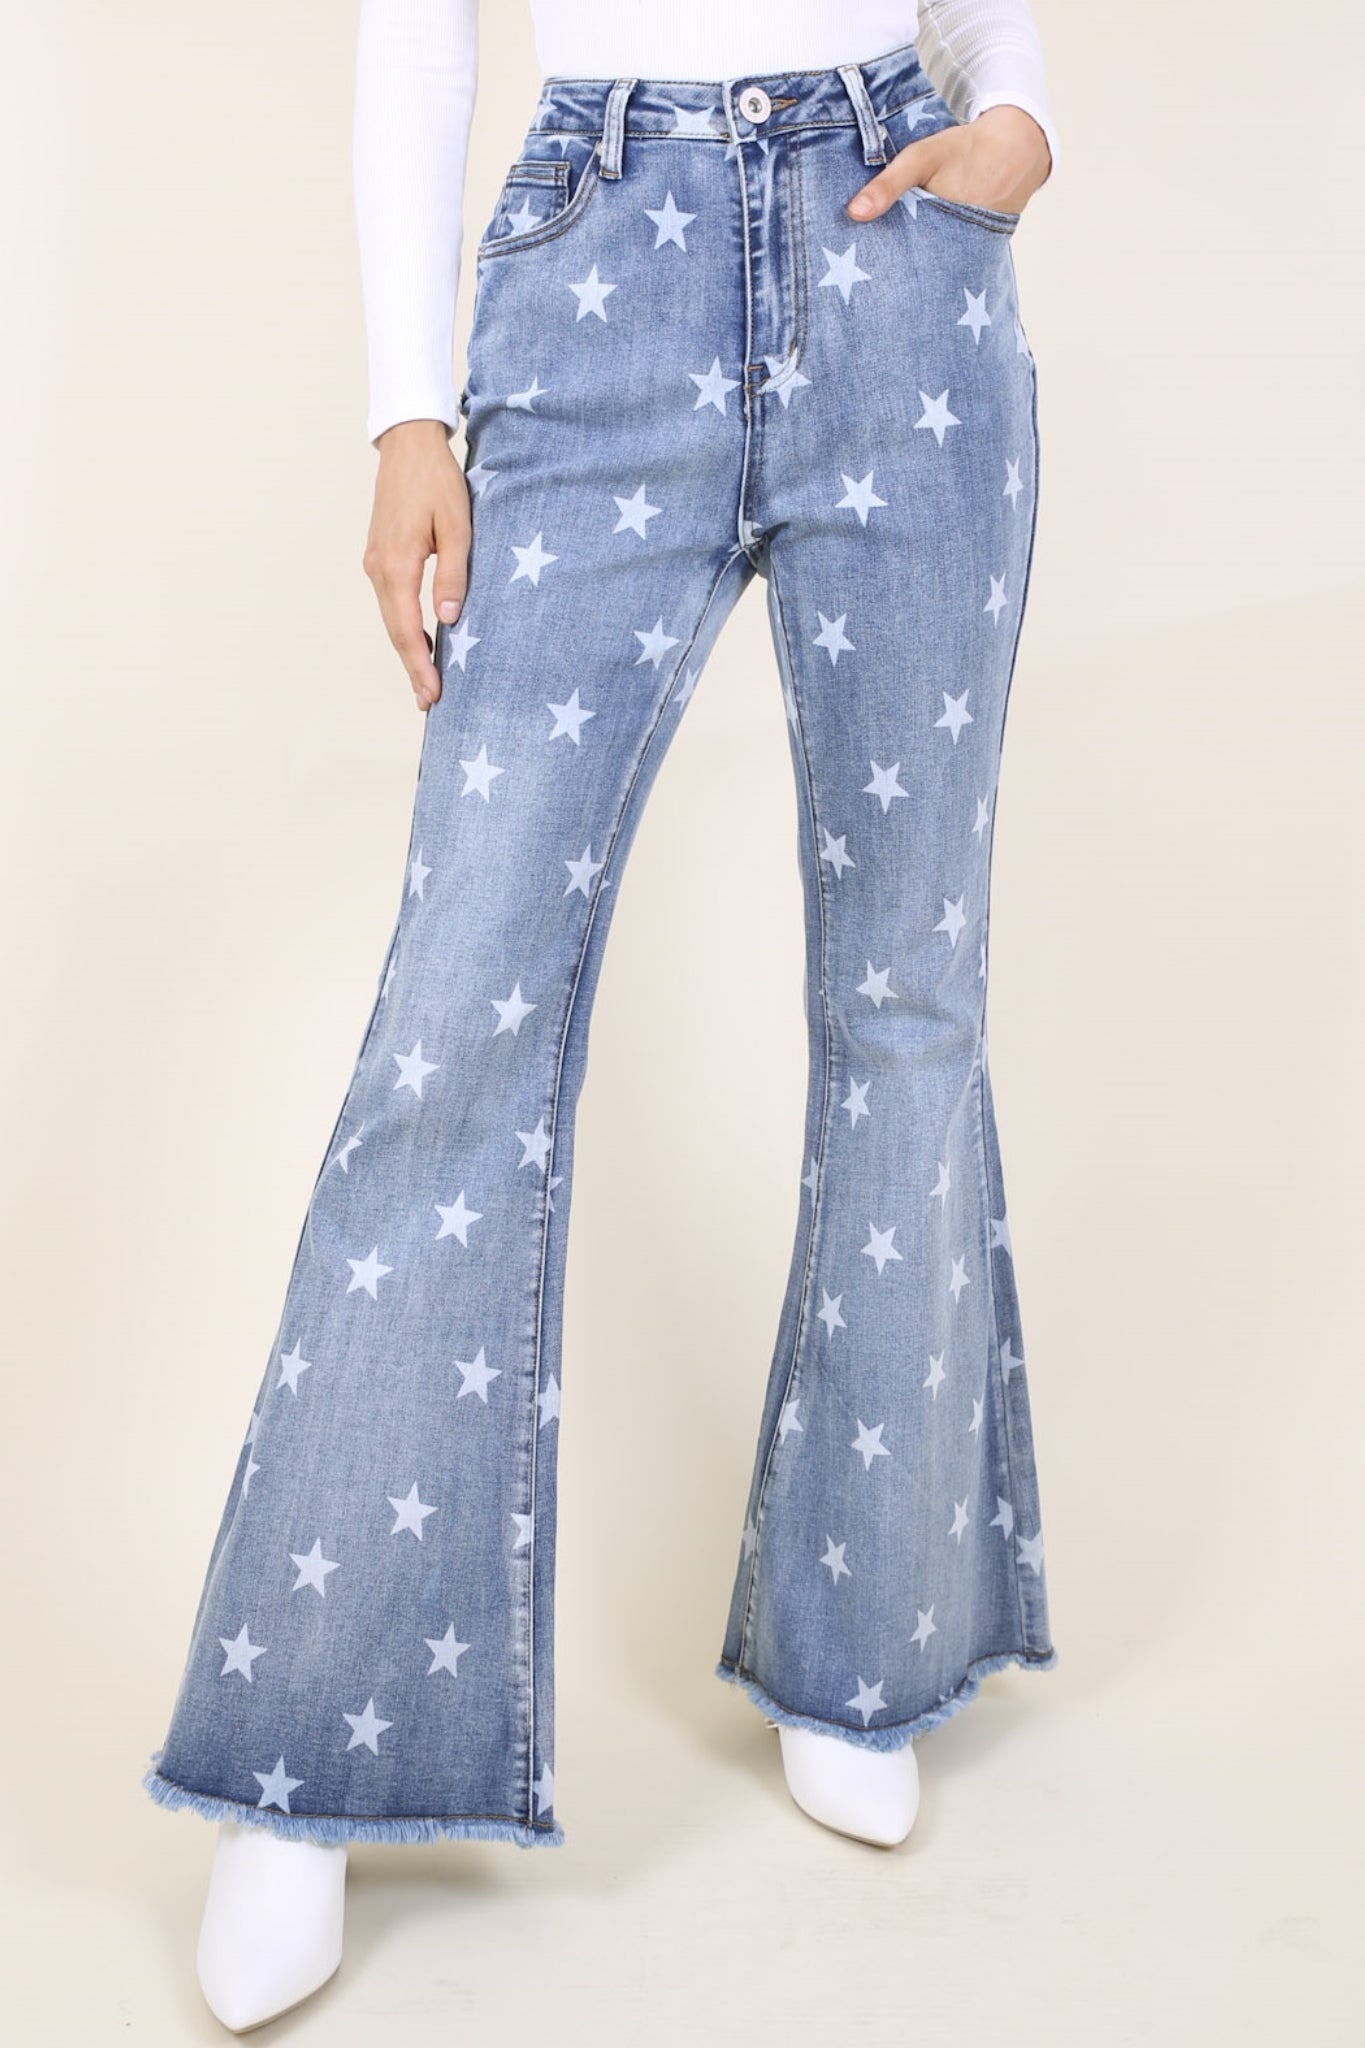 Floral Daisy Embroidered Mid Rise Bell Bottom Jeans